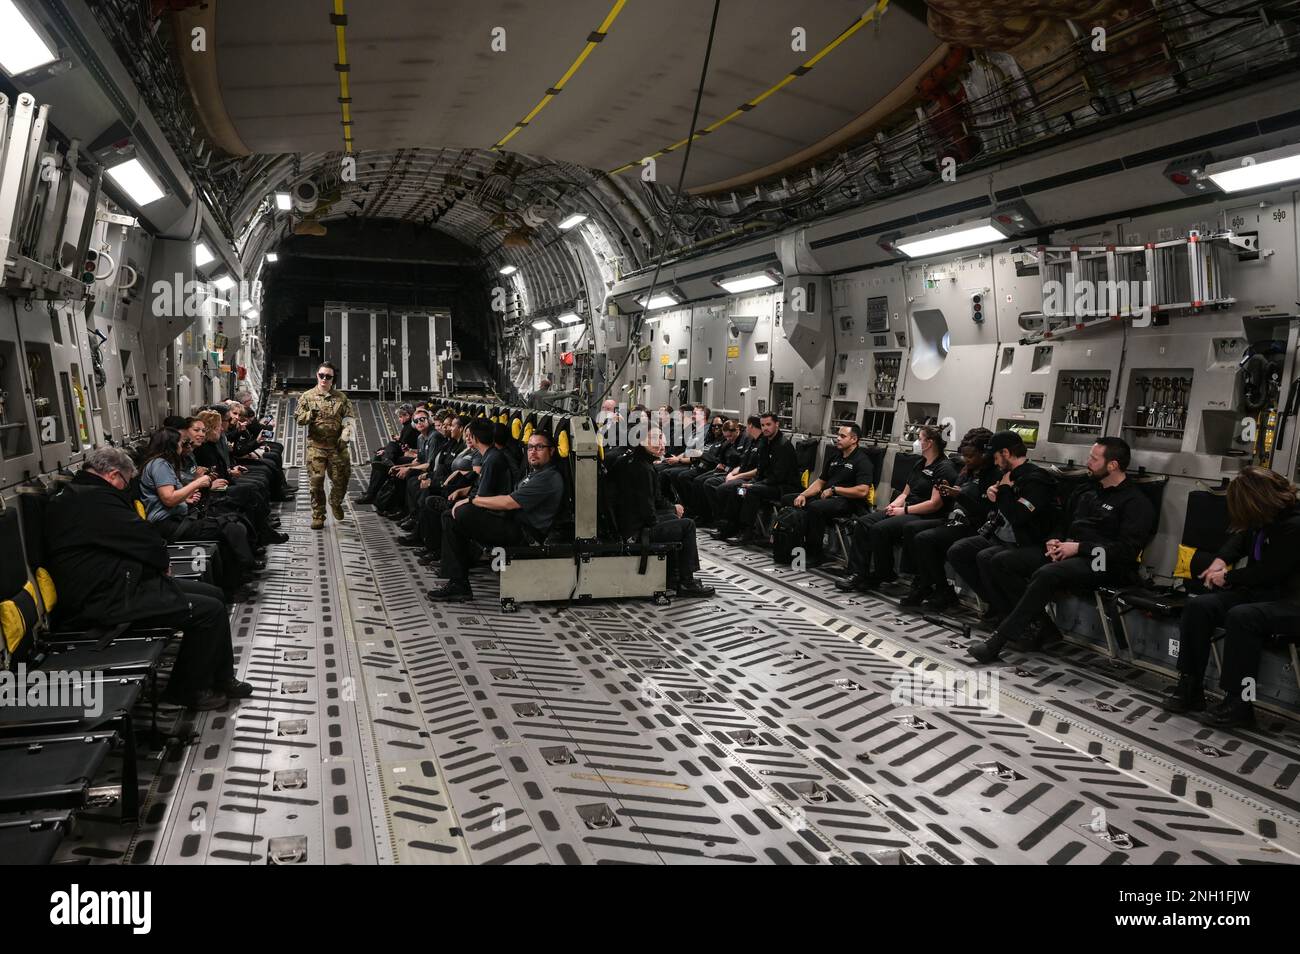 Executive Leadership Development Program participants sit inside of a C-17 Globemaster III fuselage at Joint Base Pearl Harbor-Hickam, Hawaii, Dec. 6, 2022. The 15th Wing was one of several military locations that ELDP participants visited, exposing them to various military operations. Stock Photo